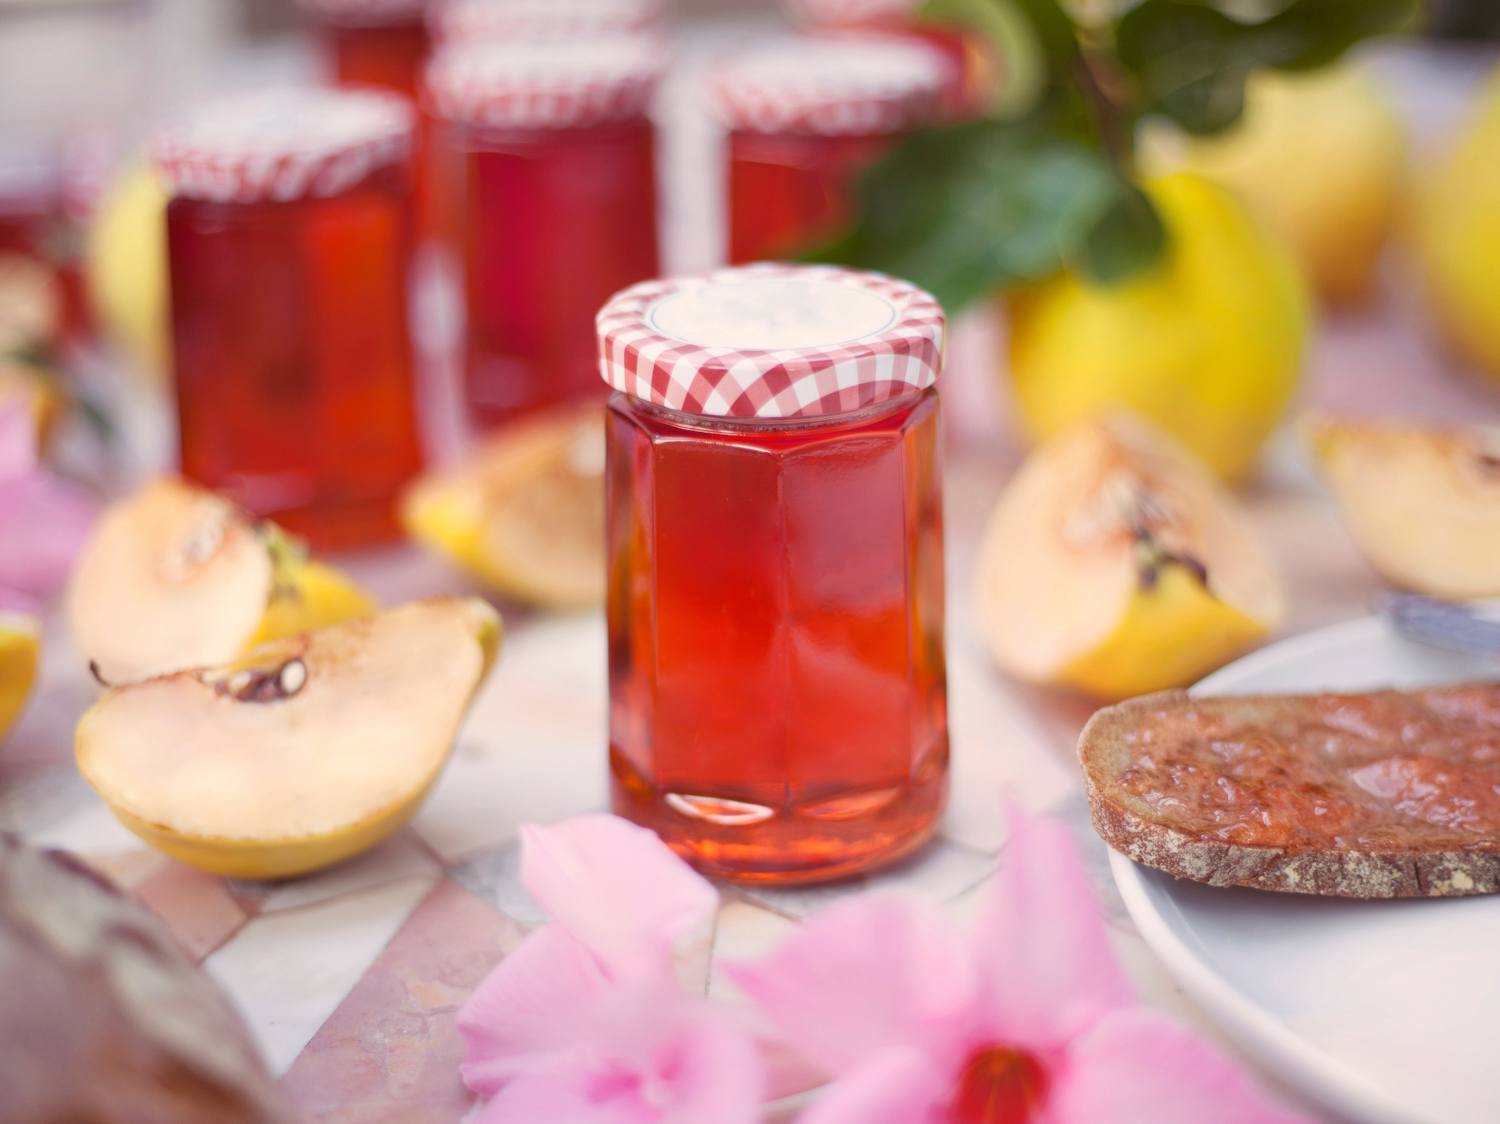 Recipe for quince jelly